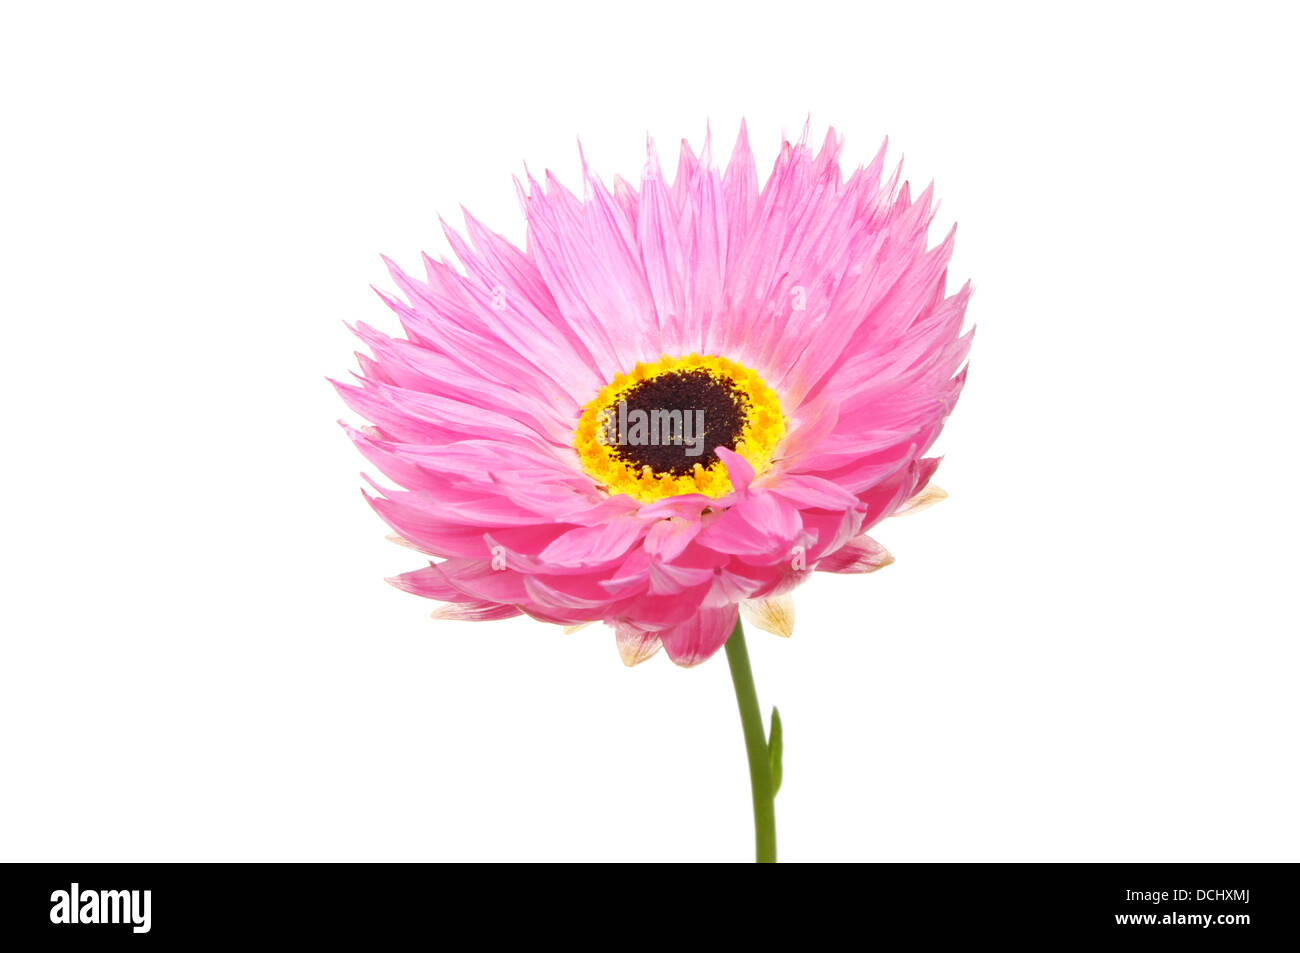 Bright pink and yellow daisy like flower isolated against white Stock Photo